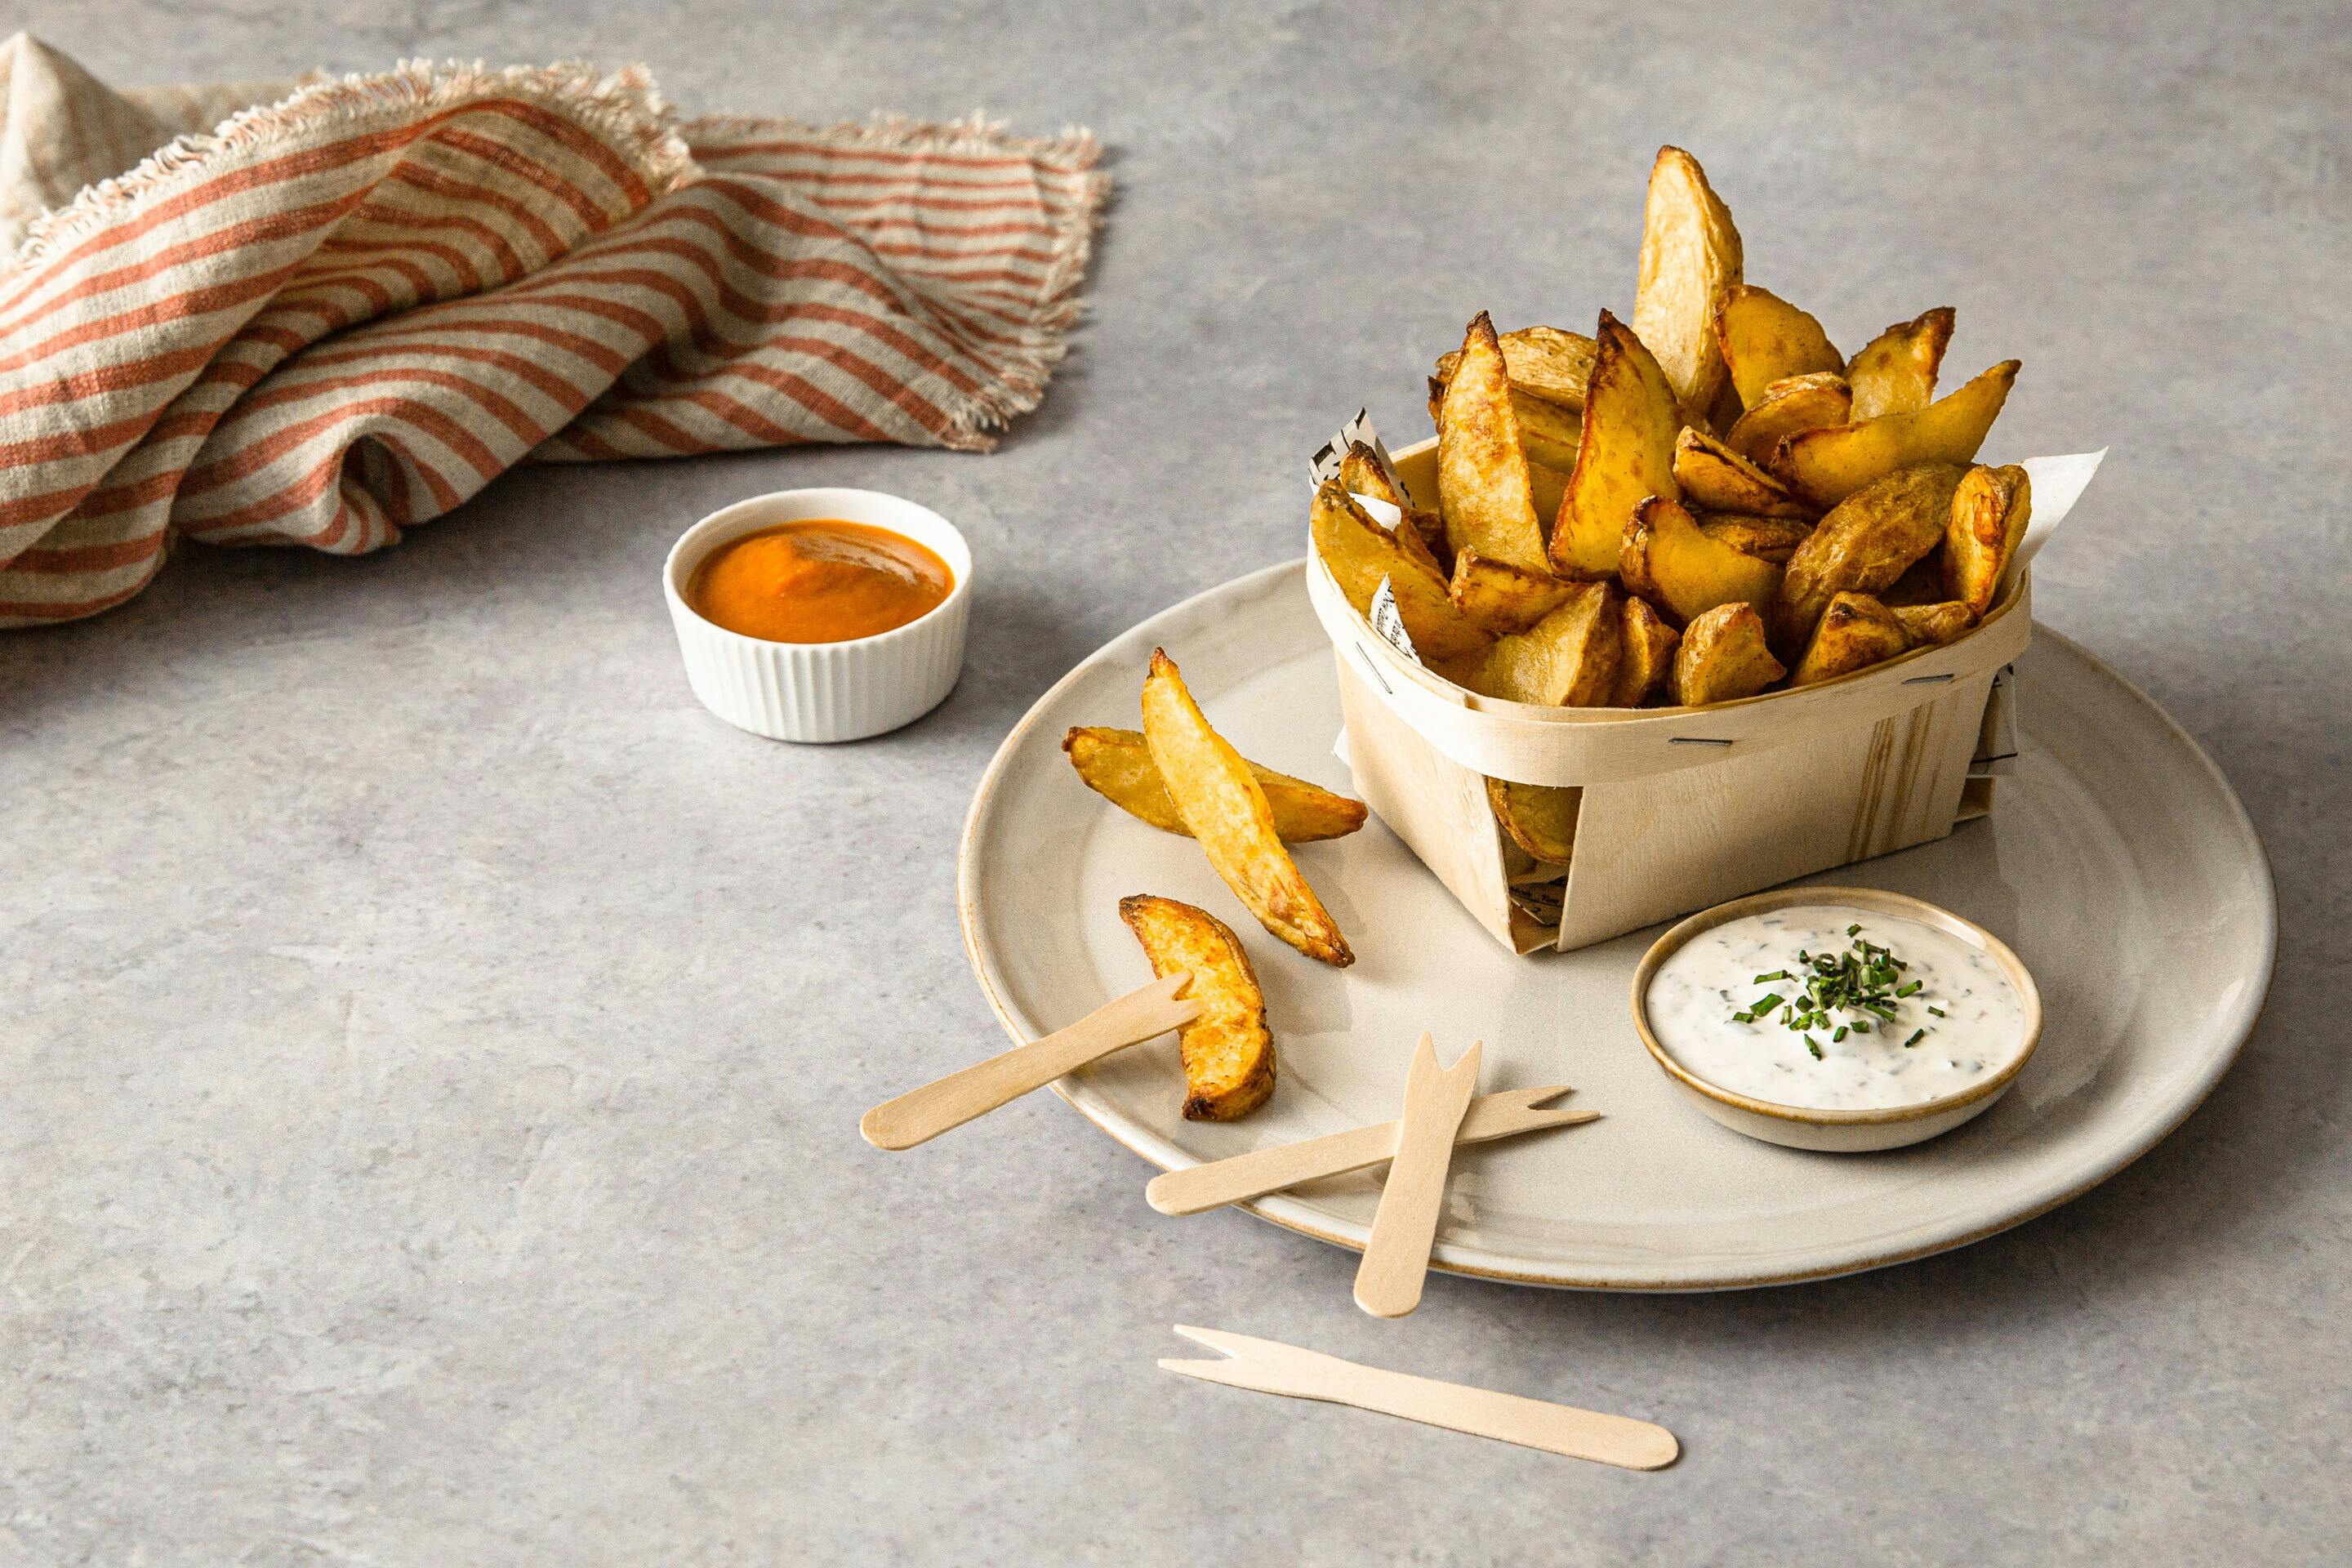 Crunchy Potato Wedges Served with Dips in a Wooden Basket on a Plate